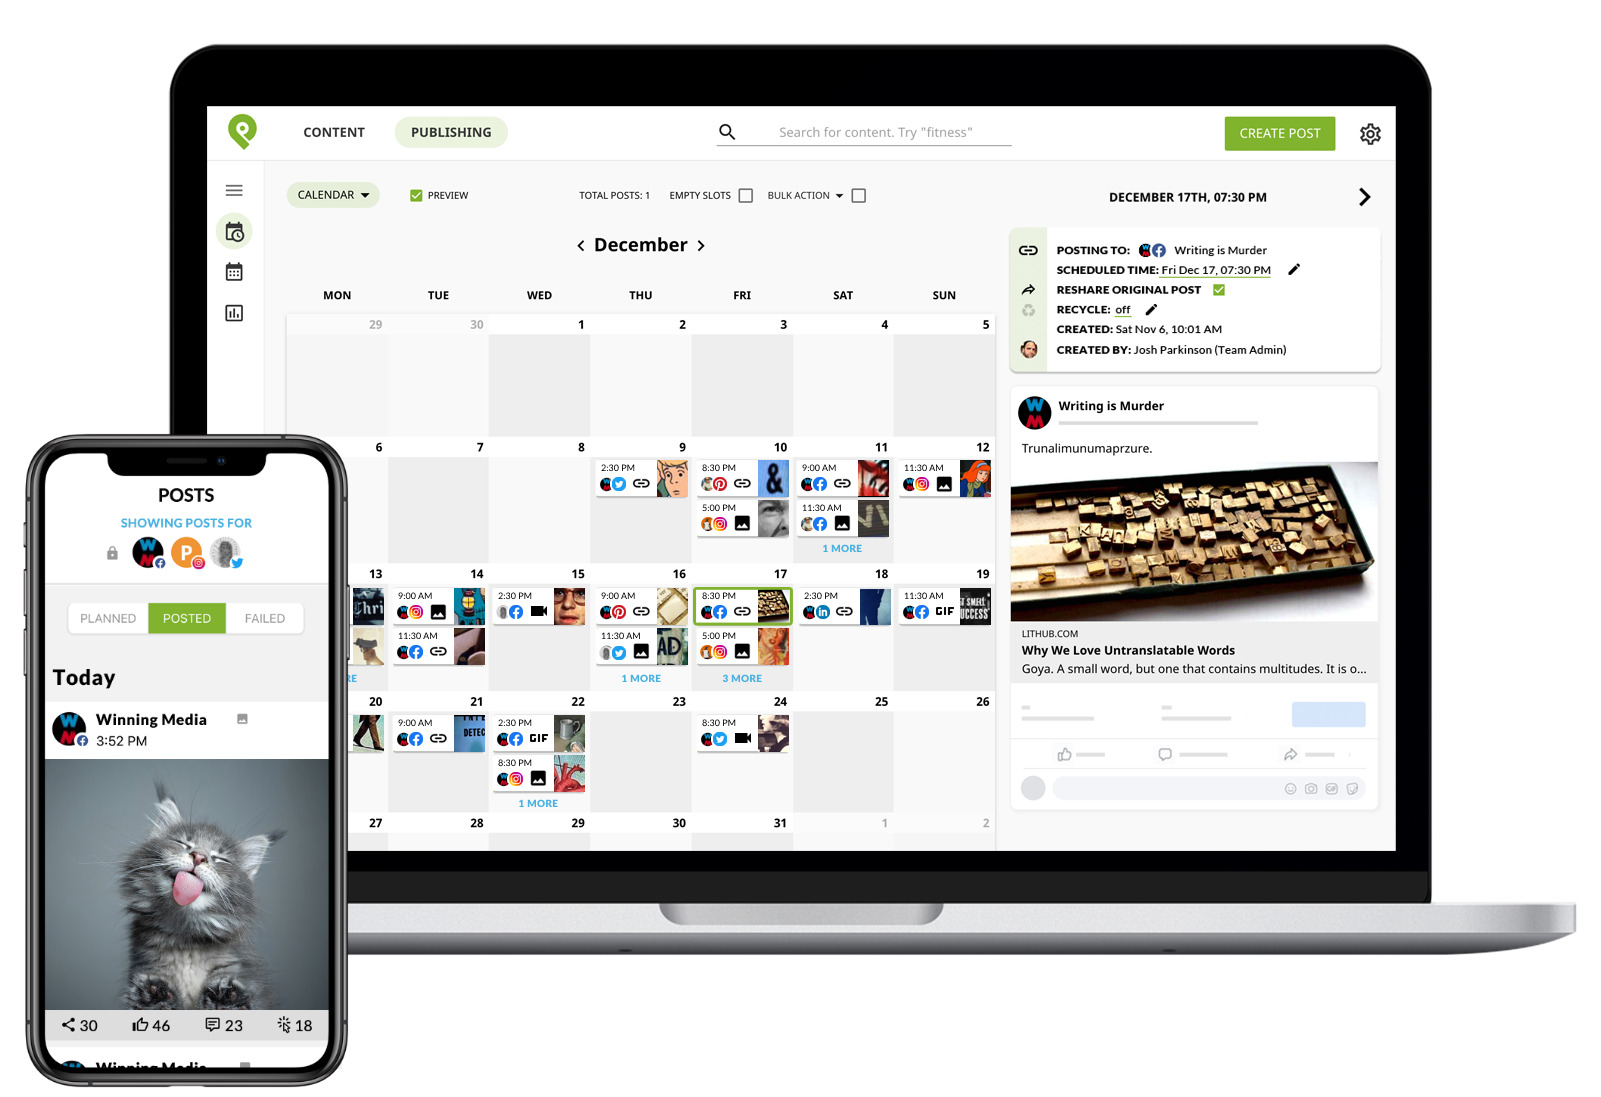 Post Planner interface is available on desktop or mobile